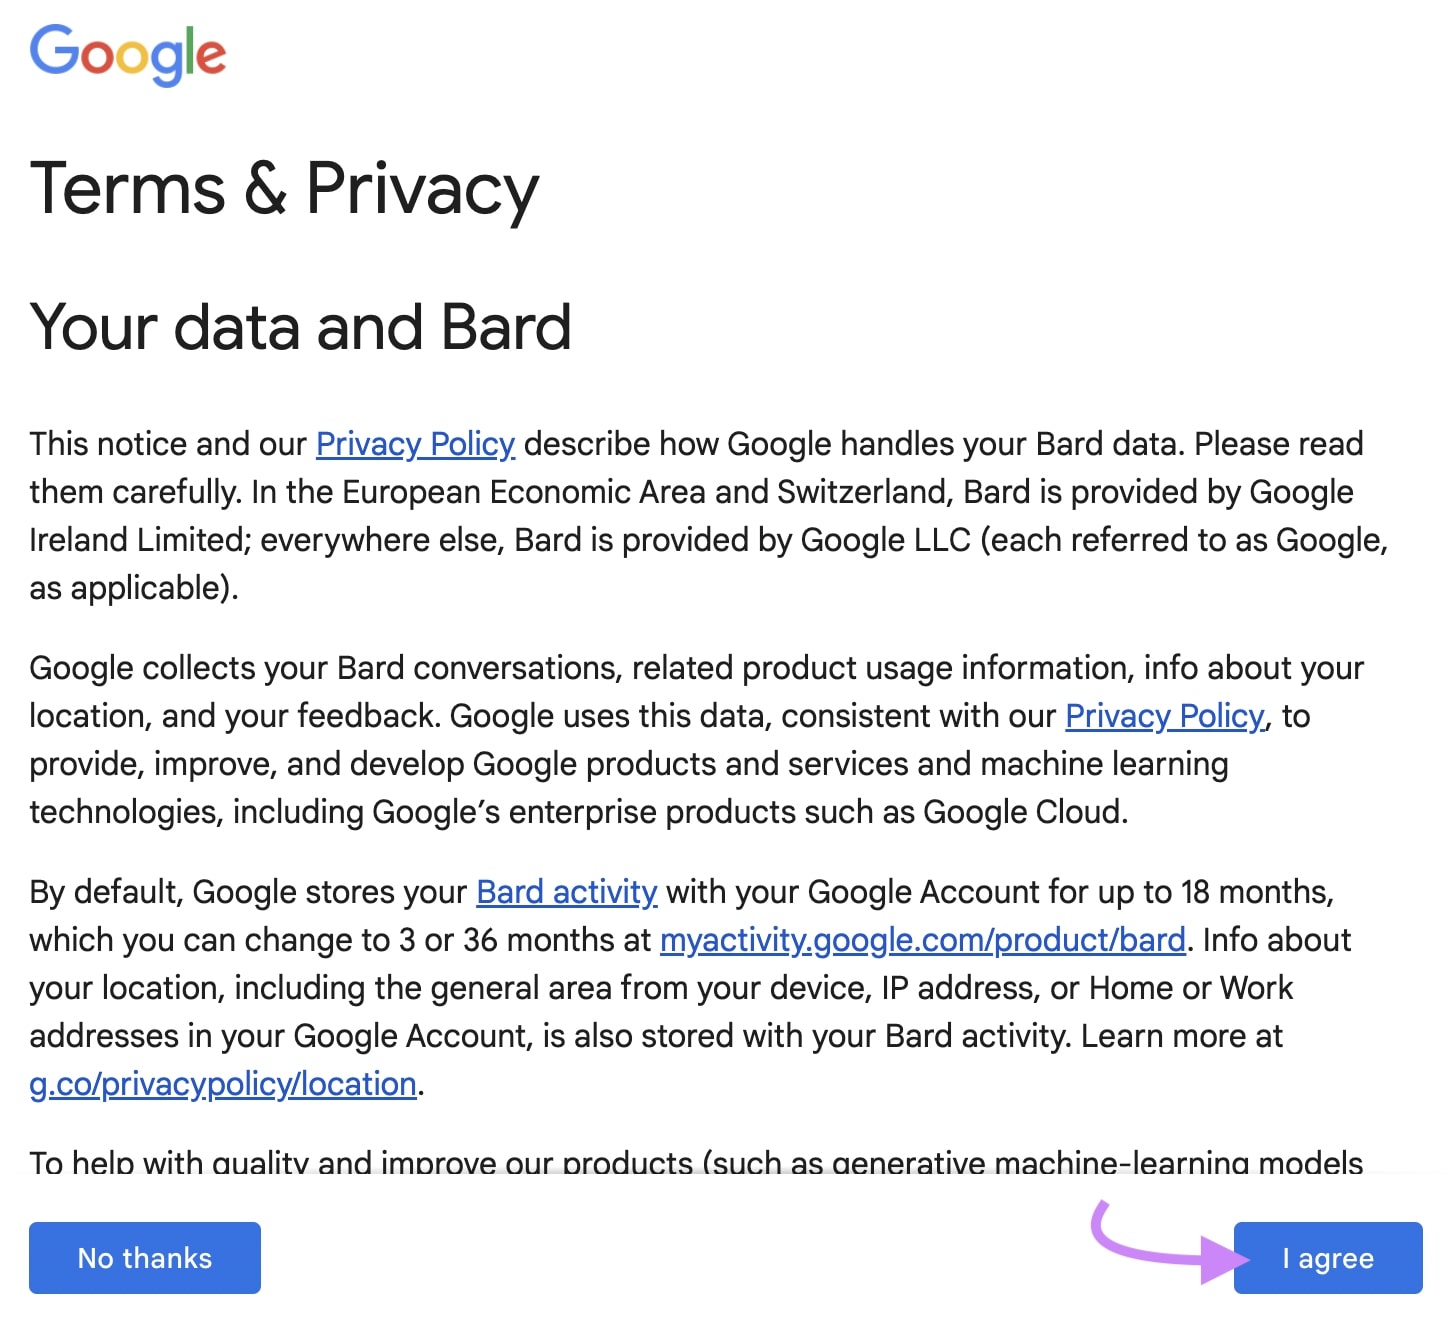 "Terms & Privacy" section in Google's Bard